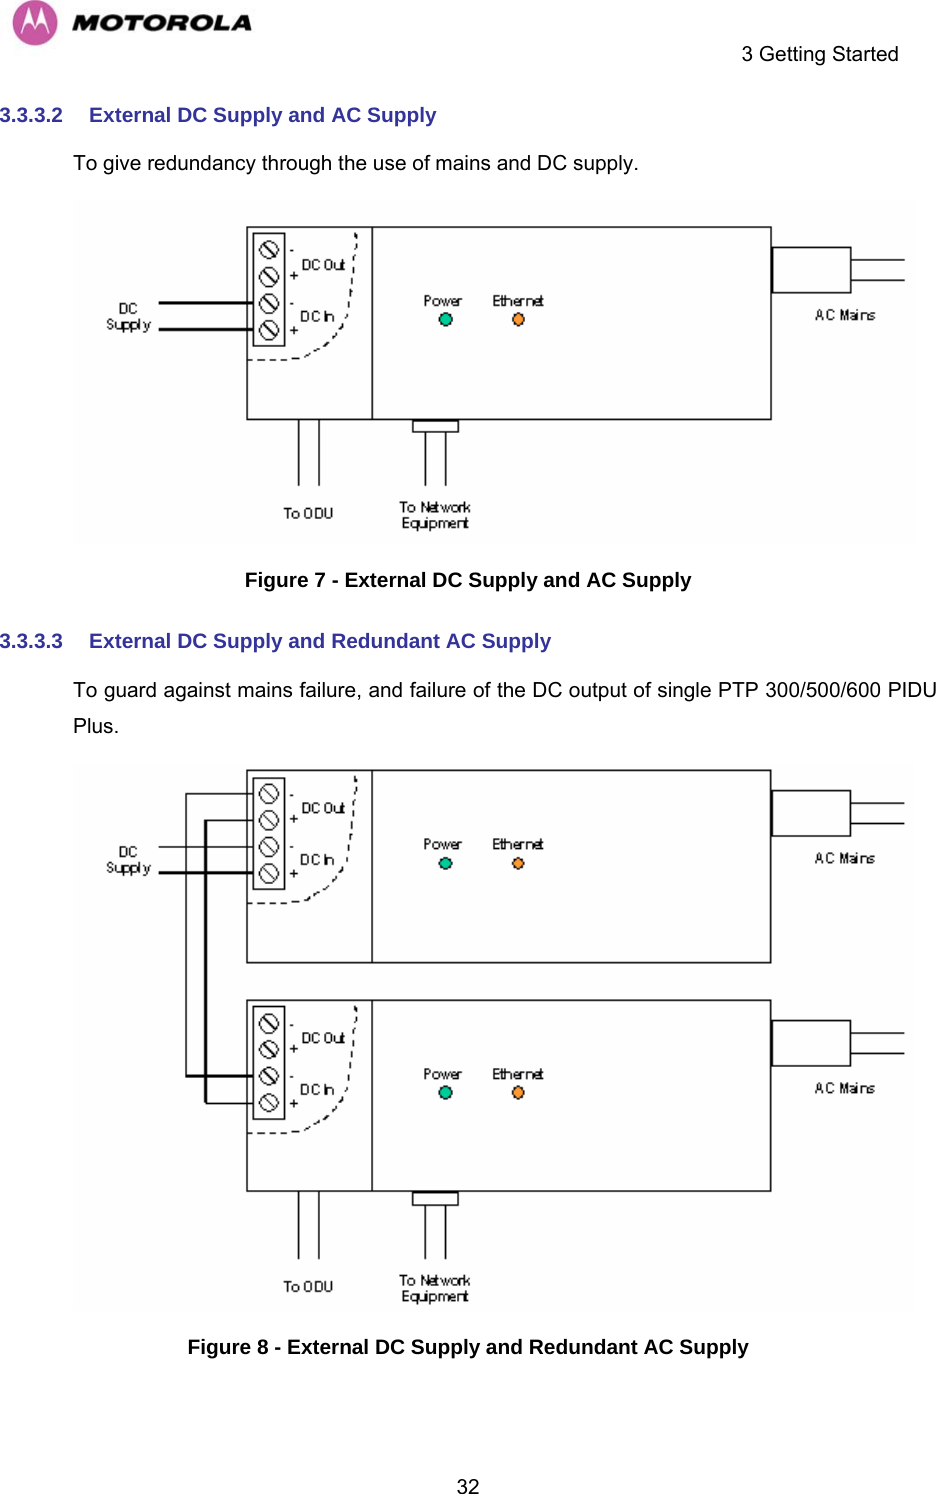     3 Getting Started  323.3.3.2  External DC Supply and AC Supply To give redundancy through the use of mains and DC supply.  Figure 7 - External DC Supply and AC Supply 3.3.3.3  External DC Supply and Redundant AC Supply To guard against mains failure, and failure of the DC output of single PTP 300/500/600 PIDU Plus.  Figure 8 - External DC Supply and Redundant AC Supply 